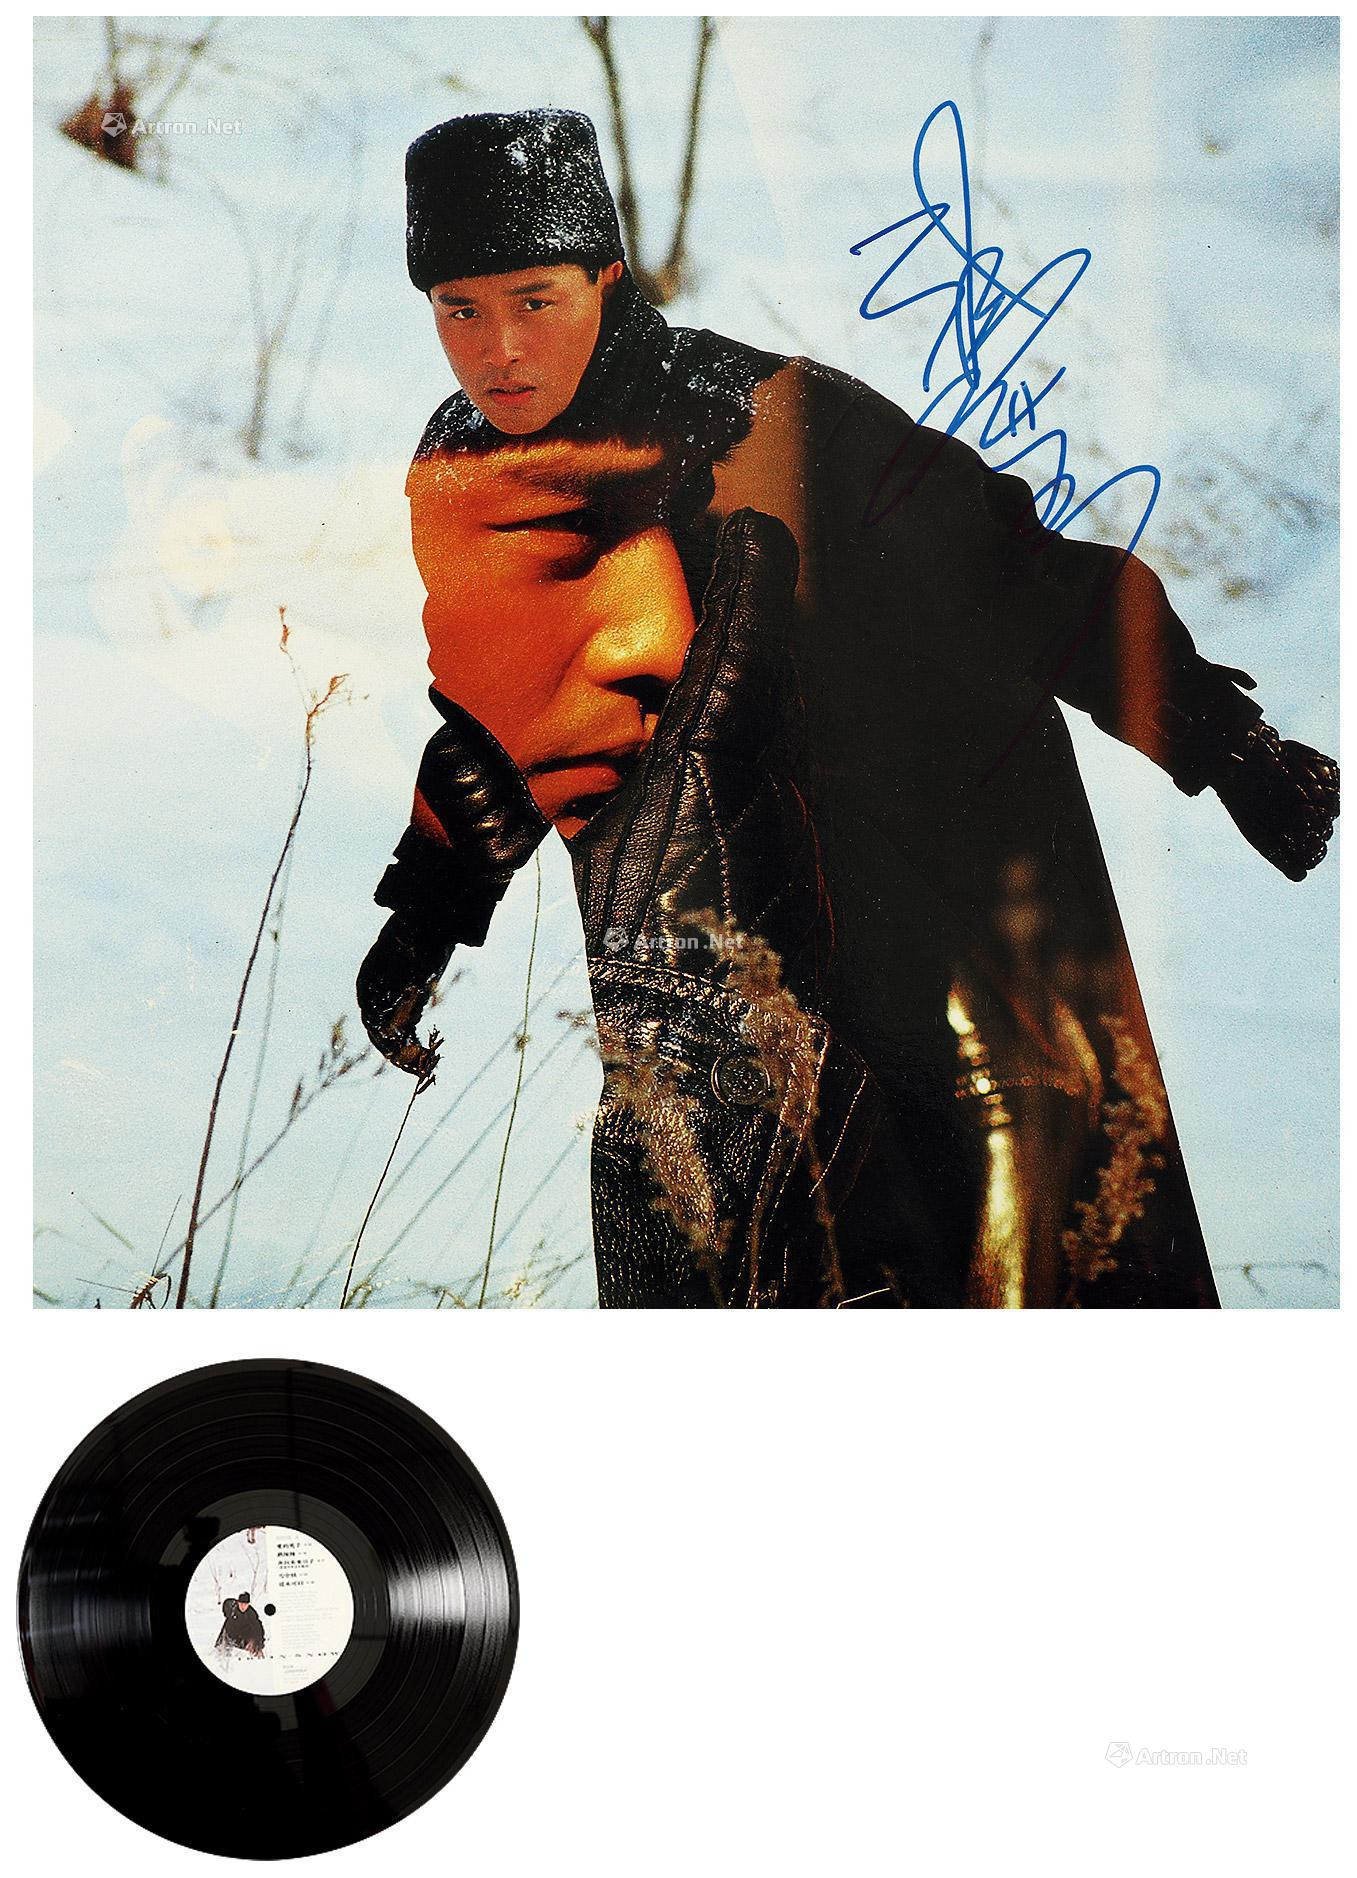 Vinyl record “Virgin Snow” autographed by Leslie Cheung